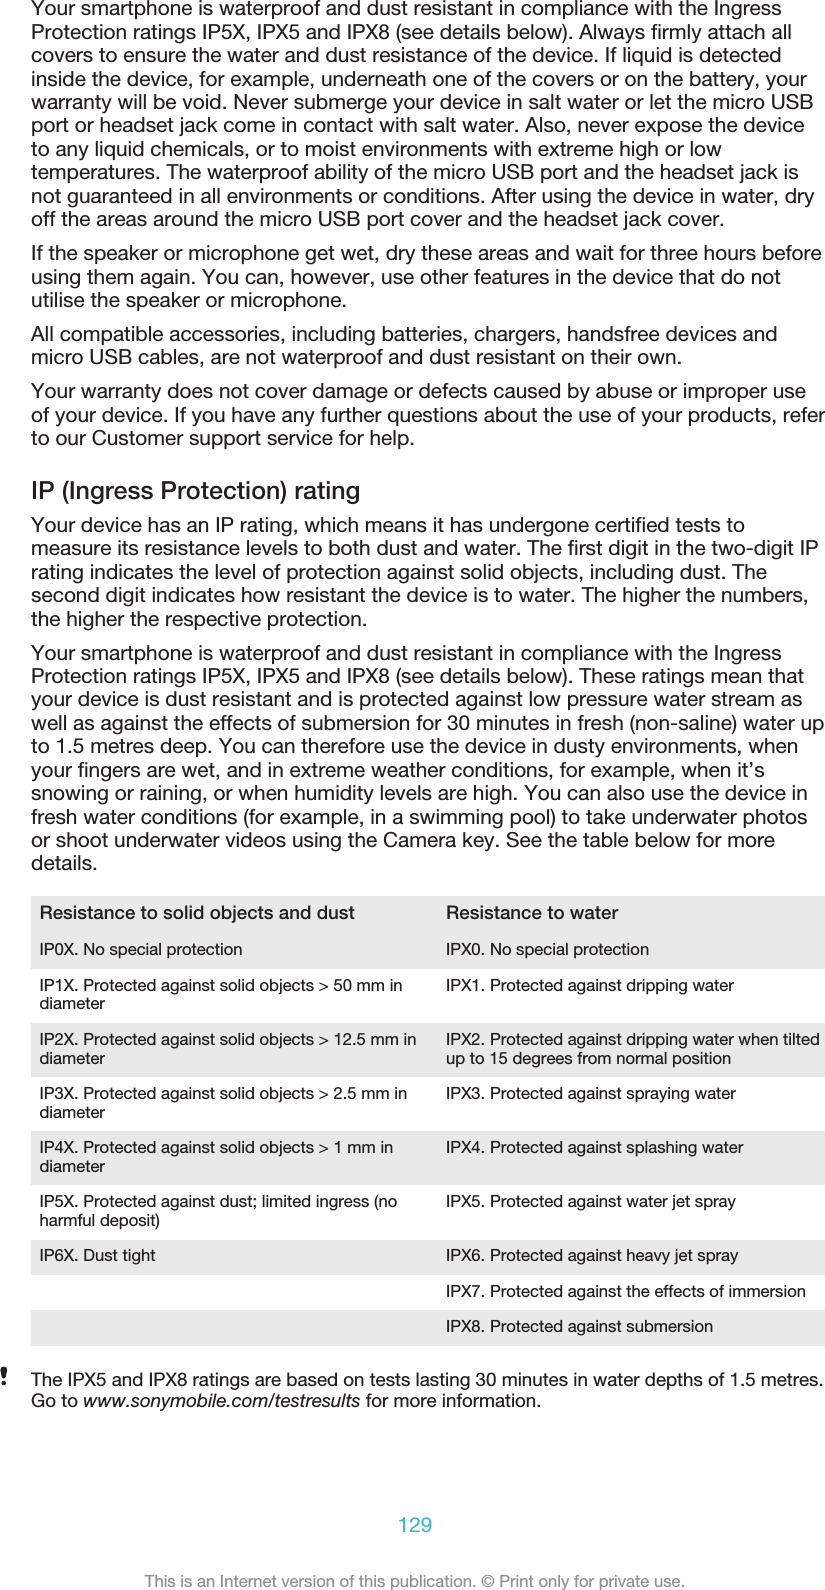 Your smartphone is waterproof and dust resistant in compliance with the IngressProtection ratings IP5X, IPX5 and IPX8 (see details below). Always firmly attach allcovers to ensure the water and dust resistance of the device. If liquid is detectedinside the device, for example, underneath one of the covers or on the battery, yourwarranty will be void. Never submerge your device in salt water or let the micro USBport or headset jack come in contact with salt water. Also, never expose the deviceto any liquid chemicals, or to moist environments with extreme high or lowtemperatures. The waterproof ability of the micro USB port and the headset jack isnot guaranteed in all environments or conditions. After using the device in water, dryoff the areas around the micro USB port cover and the headset jack cover.If the speaker or microphone get wet, dry these areas and wait for three hours beforeusing them again. You can, however, use other features in the device that do notutilise the speaker or microphone.All compatible accessories, including batteries, chargers, handsfree devices andmicro USB cables, are not waterproof and dust resistant on their own.Your warranty does not cover damage or defects caused by abuse or improper useof your device. If you have any further questions about the use of your products, referto our Customer support service for help.IP (Ingress Protection) ratingYour device has an IP rating, which means it has undergone certified tests tomeasure its resistance levels to both dust and water. The first digit in the two-digit IPrating indicates the level of protection against solid objects, including dust. Thesecond digit indicates how resistant the device is to water. The higher the numbers,the higher the respective protection.Your smartphone is waterproof and dust resistant in compliance with the IngressProtection ratings IP5X, IPX5 and IPX8 (see details below). These ratings mean thatyour device is dust resistant and is protected against low pressure water stream aswell as against the effects of submersion for 30 minutes in fresh (non-saline) water upto 1.5 metres deep. You can therefore use the device in dusty environments, whenyour fingers are wet, and in extreme weather conditions, for example, when it’ssnowing or raining, or when humidity levels are high. You can also use the device infresh water conditions (for example, in a swimming pool) to take underwater photosor shoot underwater videos using the Camera key. See the table below for moredetails.Resistance to solid objects and dust Resistance to waterIP0X. No special protection IPX0. No special protectionIP1X. Protected against solid objects &gt; 50 mm indiameter IPX1. Protected against dripping waterIP2X. Protected against solid objects &gt; 12.5 mm indiameter IPX2. Protected against dripping water when tiltedup to 15 degrees from normal positionIP3X. Protected against solid objects &gt; 2.5 mm indiameter IPX3. Protected against spraying waterIP4X. Protected against solid objects &gt; 1 mm indiameter IPX4. Protected against splashing waterIP5X. Protected against dust; limited ingress (noharmful deposit) IPX5. Protected against water jet sprayIP6X. Dust tight IPX6. Protected against heavy jet spray  IPX7. Protected against the effects of immersion  IPX8. Protected against submersionThe IPX5 and IPX8 ratings are based on tests lasting 30 minutes in water depths of 1.5 metres.Go to www.sonymobile.com/testresults for more information.129This is an Internet version of this publication. © Print only for private use.